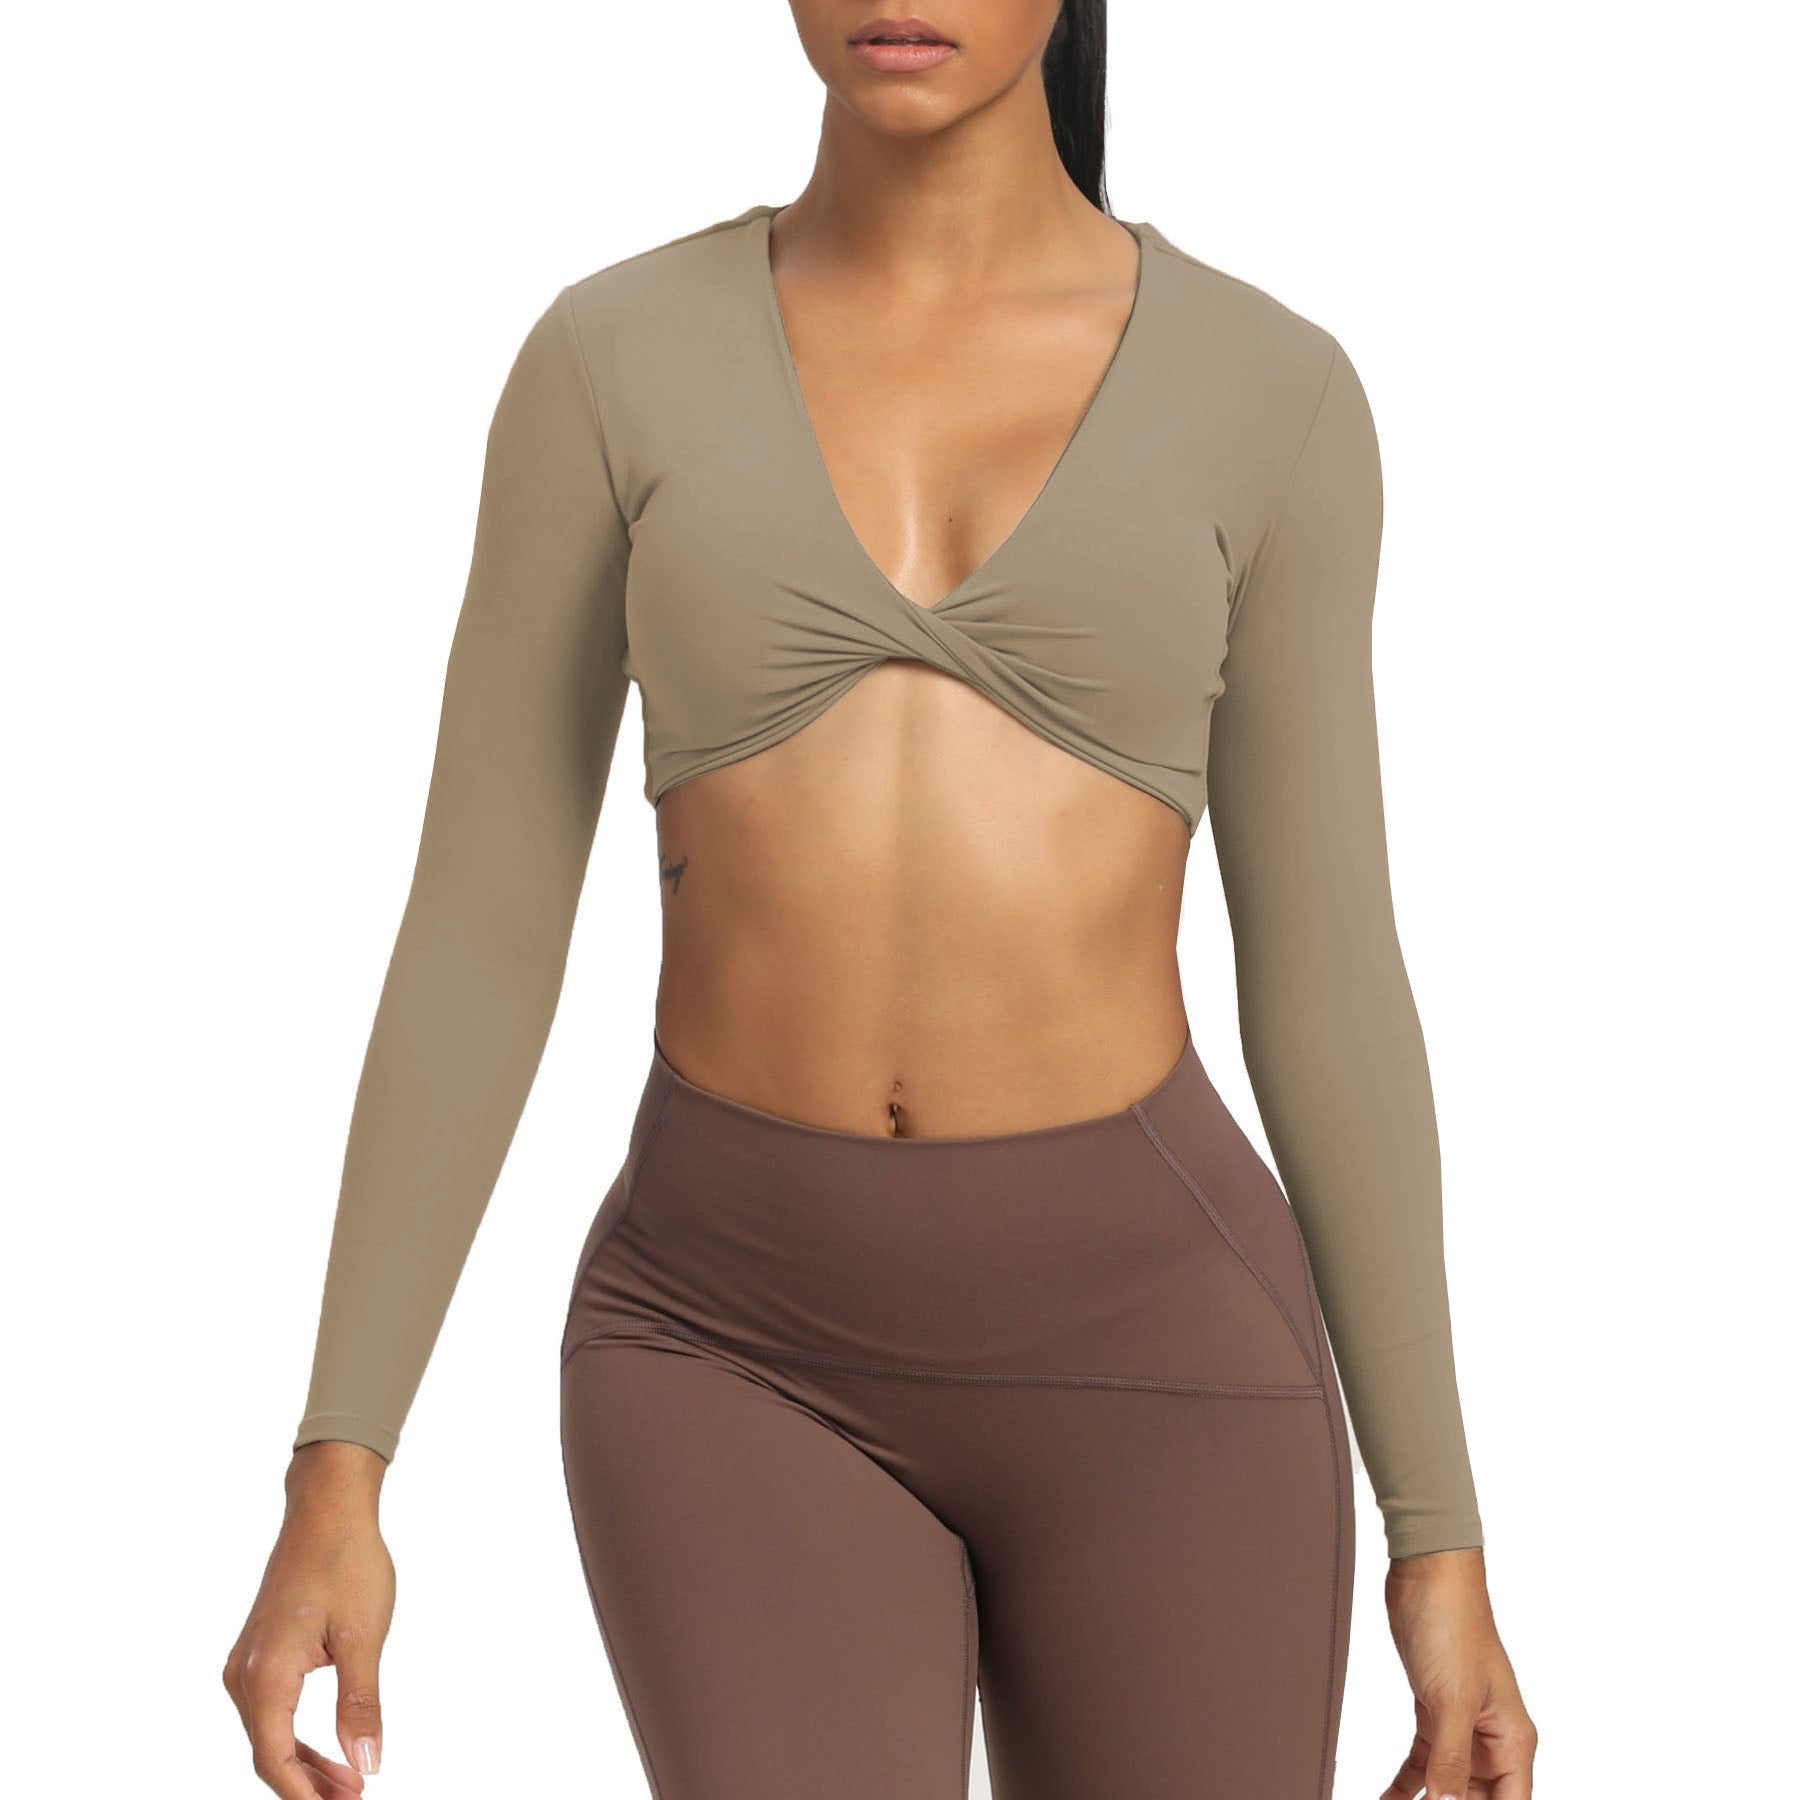 Aoxjox Deep V long-sleeved top (CONT'D)